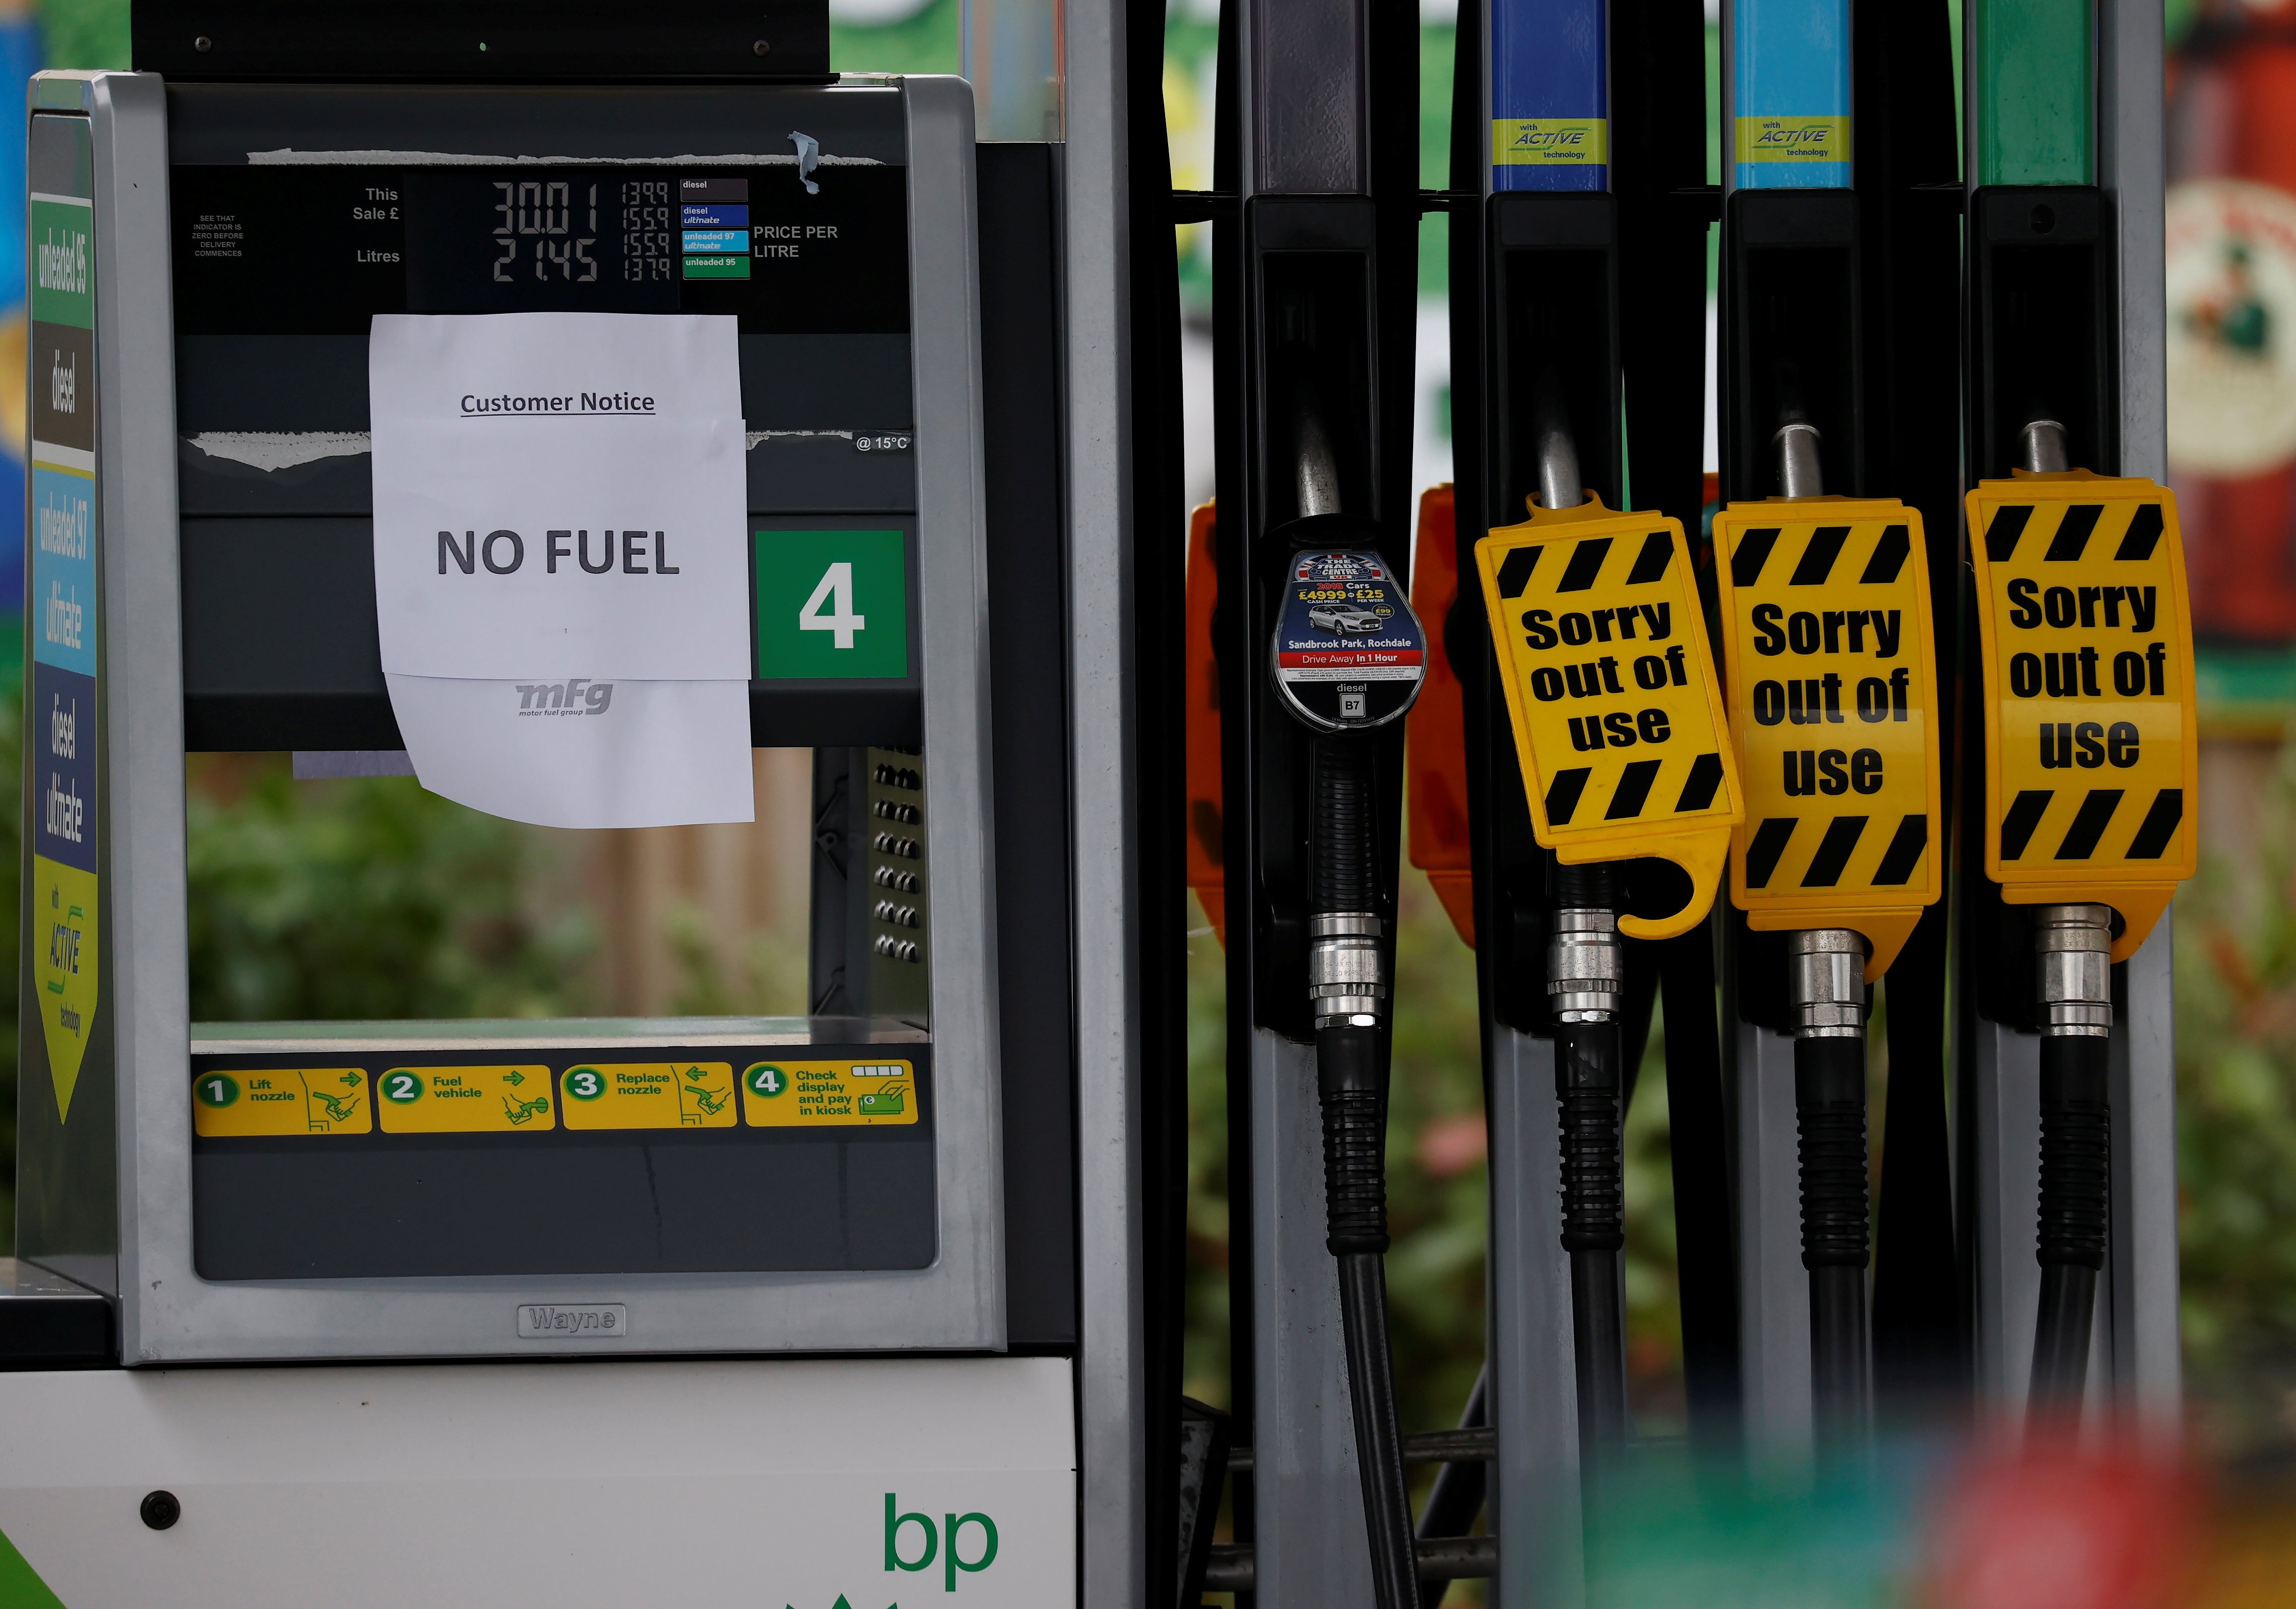 A 'No Fuel' sign attached to an empty petrol pump at a BP filling station in Manchester